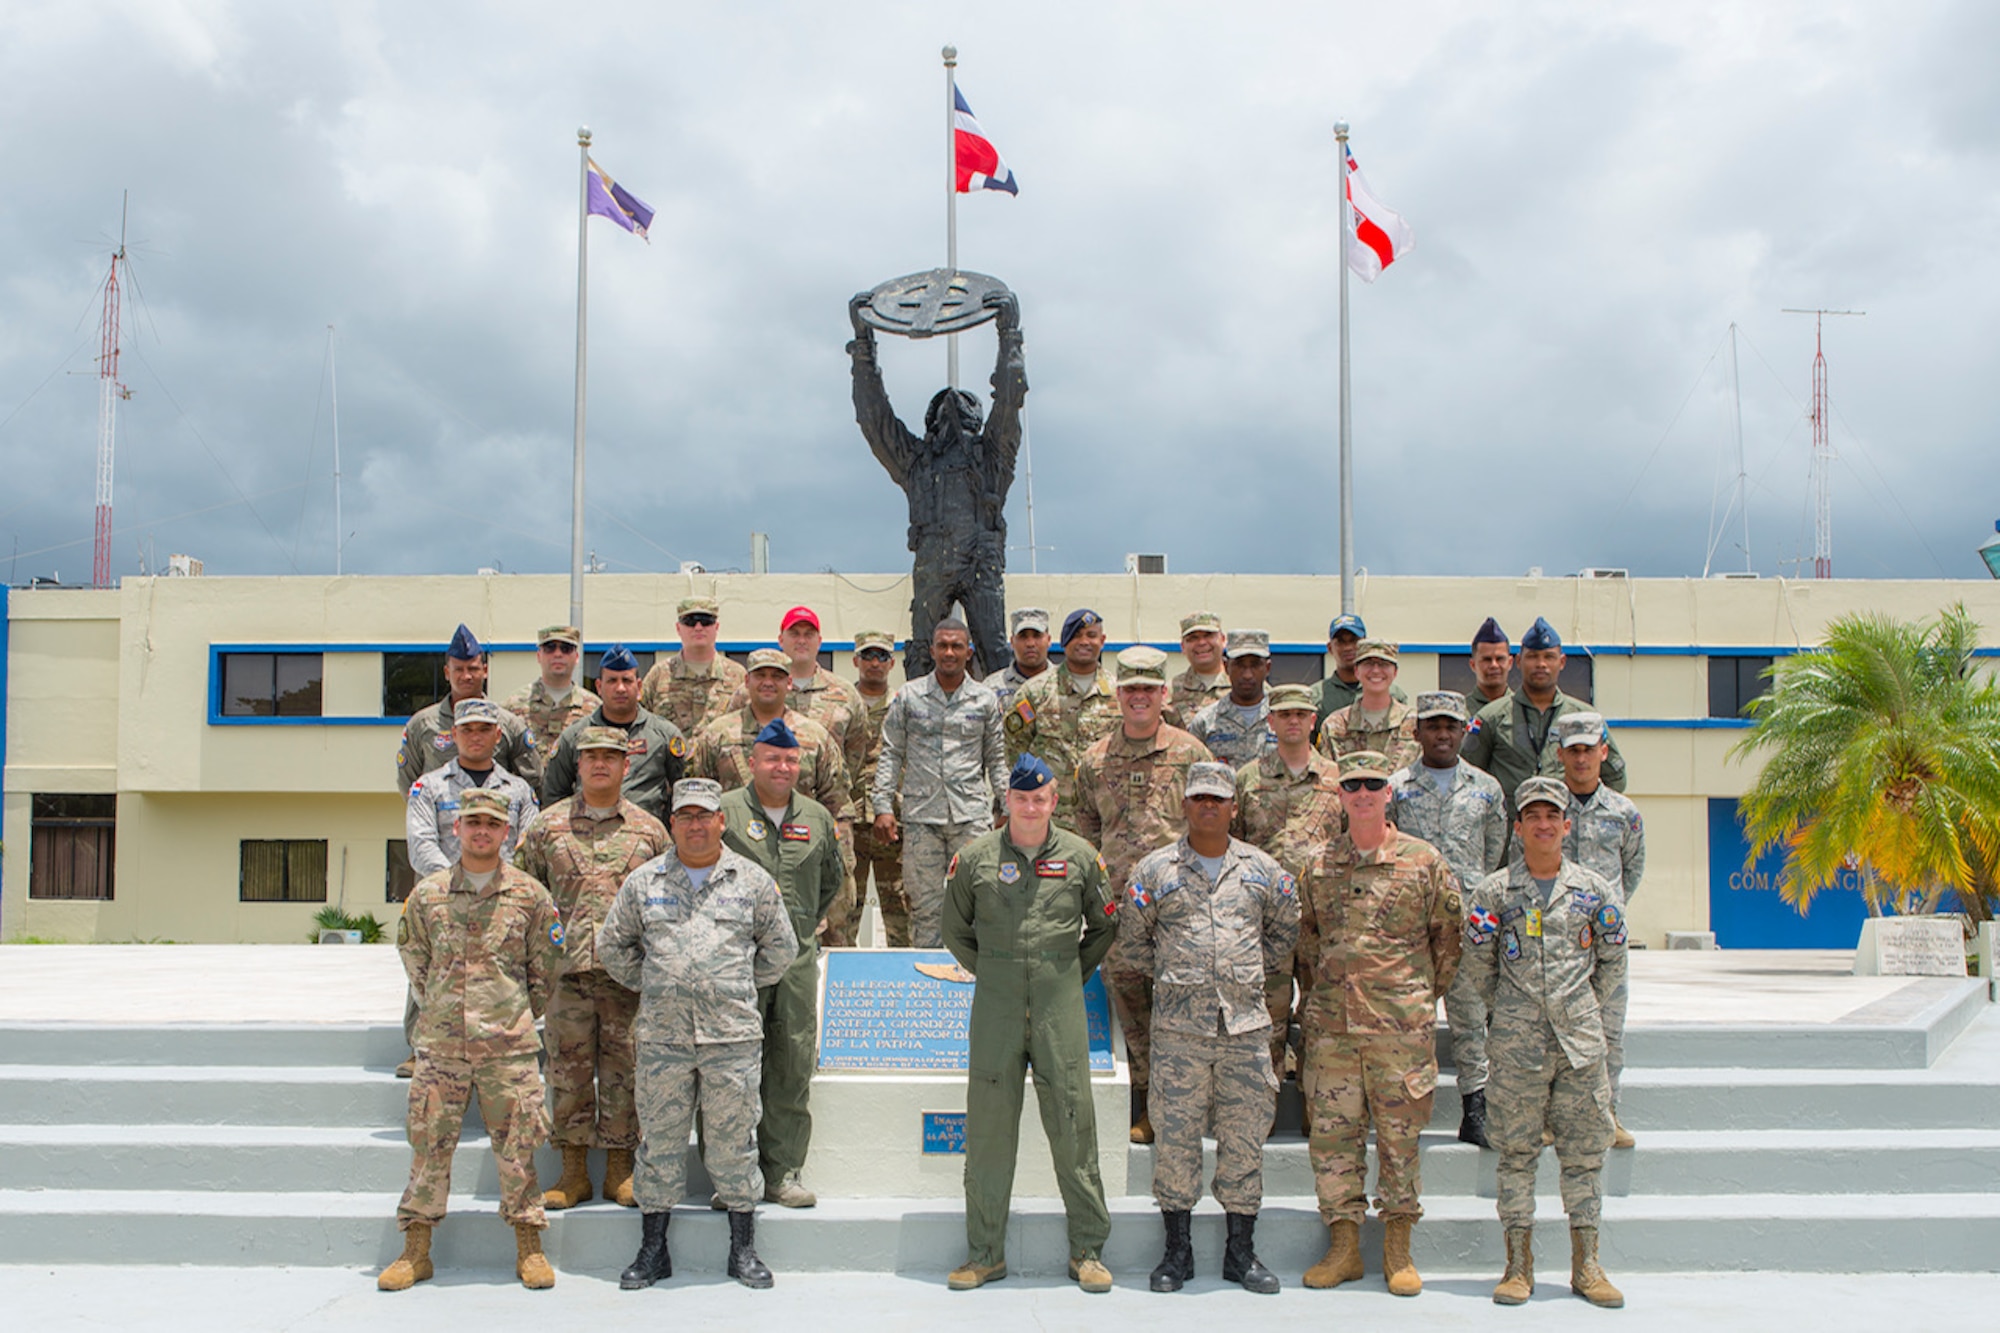 Military members from the 571st Air Mobility Advisory Squadron and the Dominican Republic Air Force pose for a photo in front of the headquarters building at the San Isidro Air Base, Dominican Republic, May 4. The MSAS team trained members of the FARD on aircraft weight and balance, corrosion control, hazardous materials management and radio communications.  They also conducted an assessment of vehicle maintenance and operations. (U.S. Air Force photo by Staff Sgt. Heather Flitcroft)